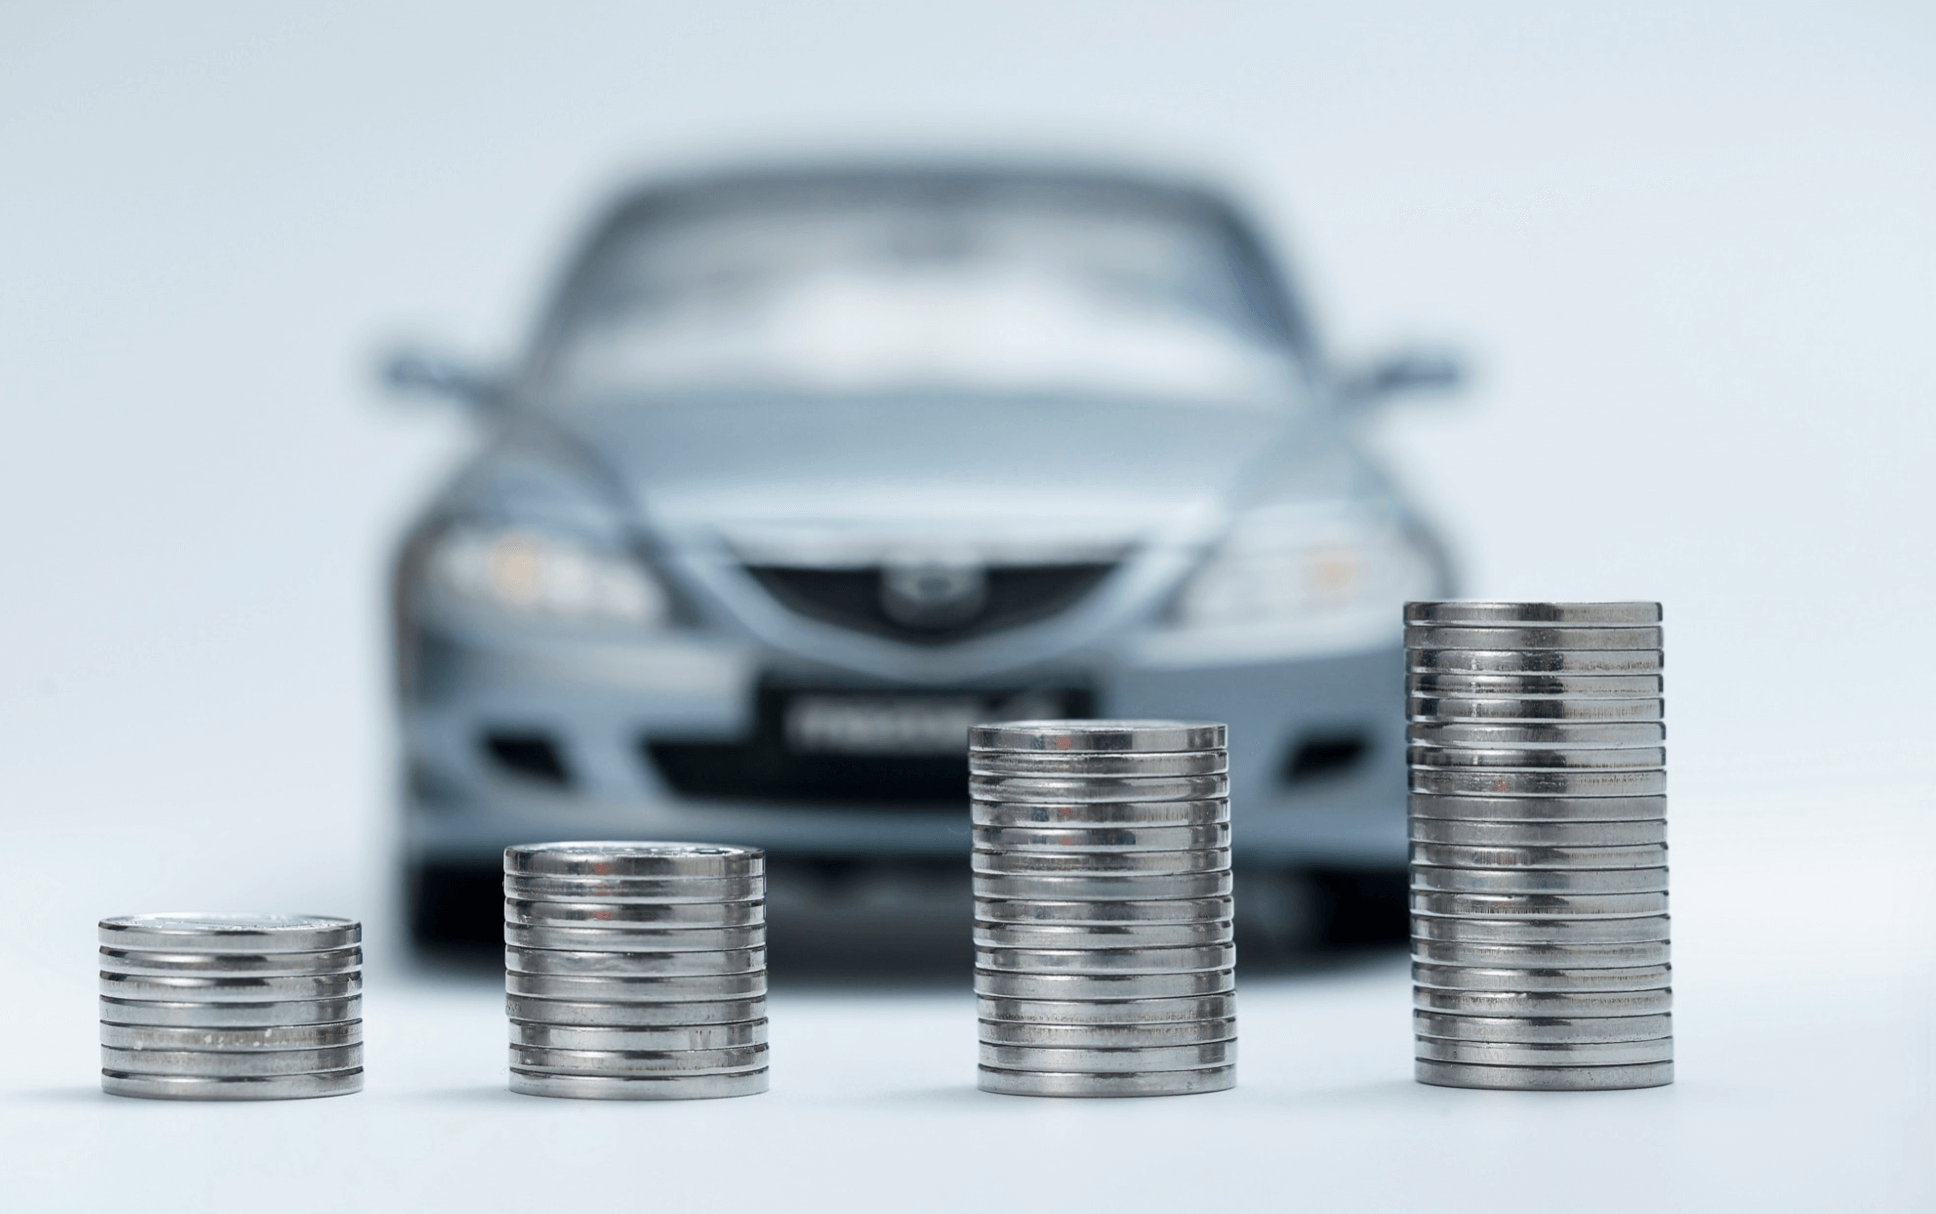 coins stacked in front of car